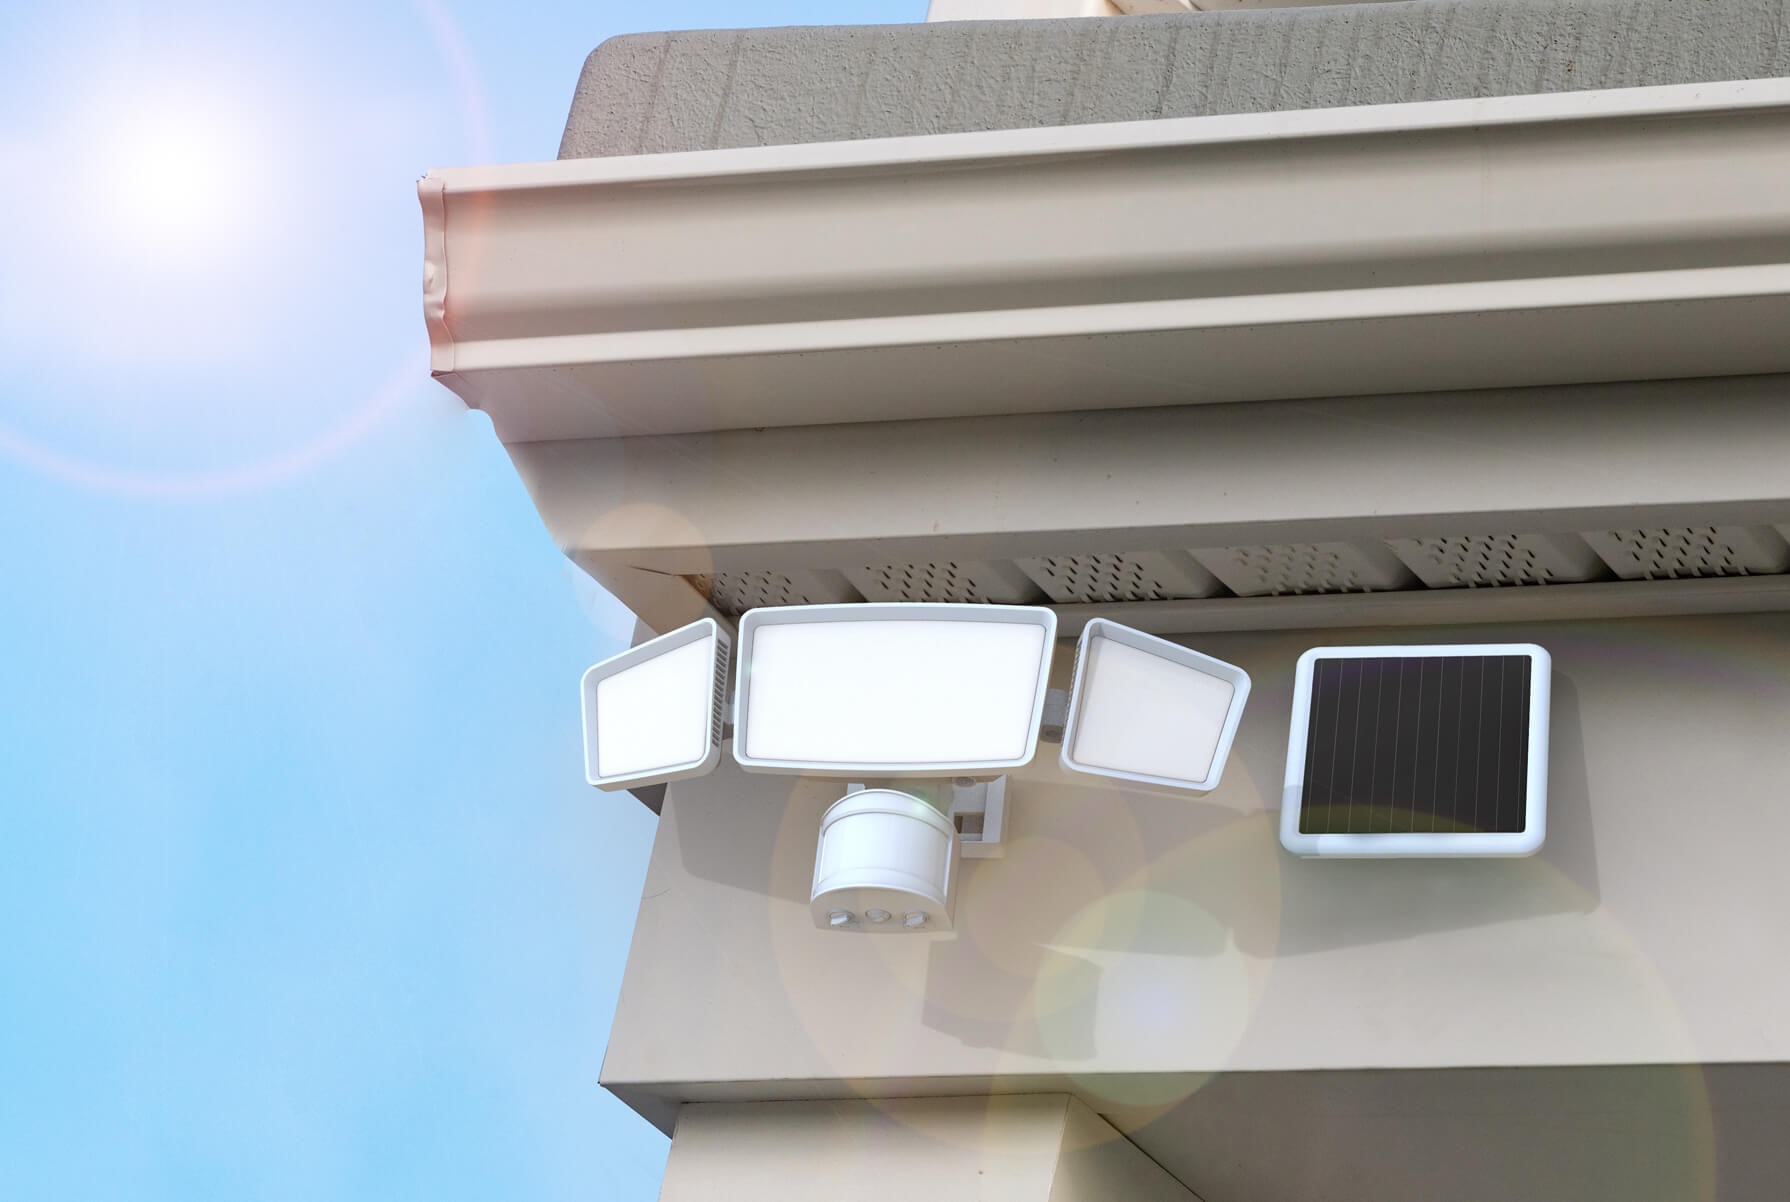 How To Connect A Motion Detector To A Solar Light